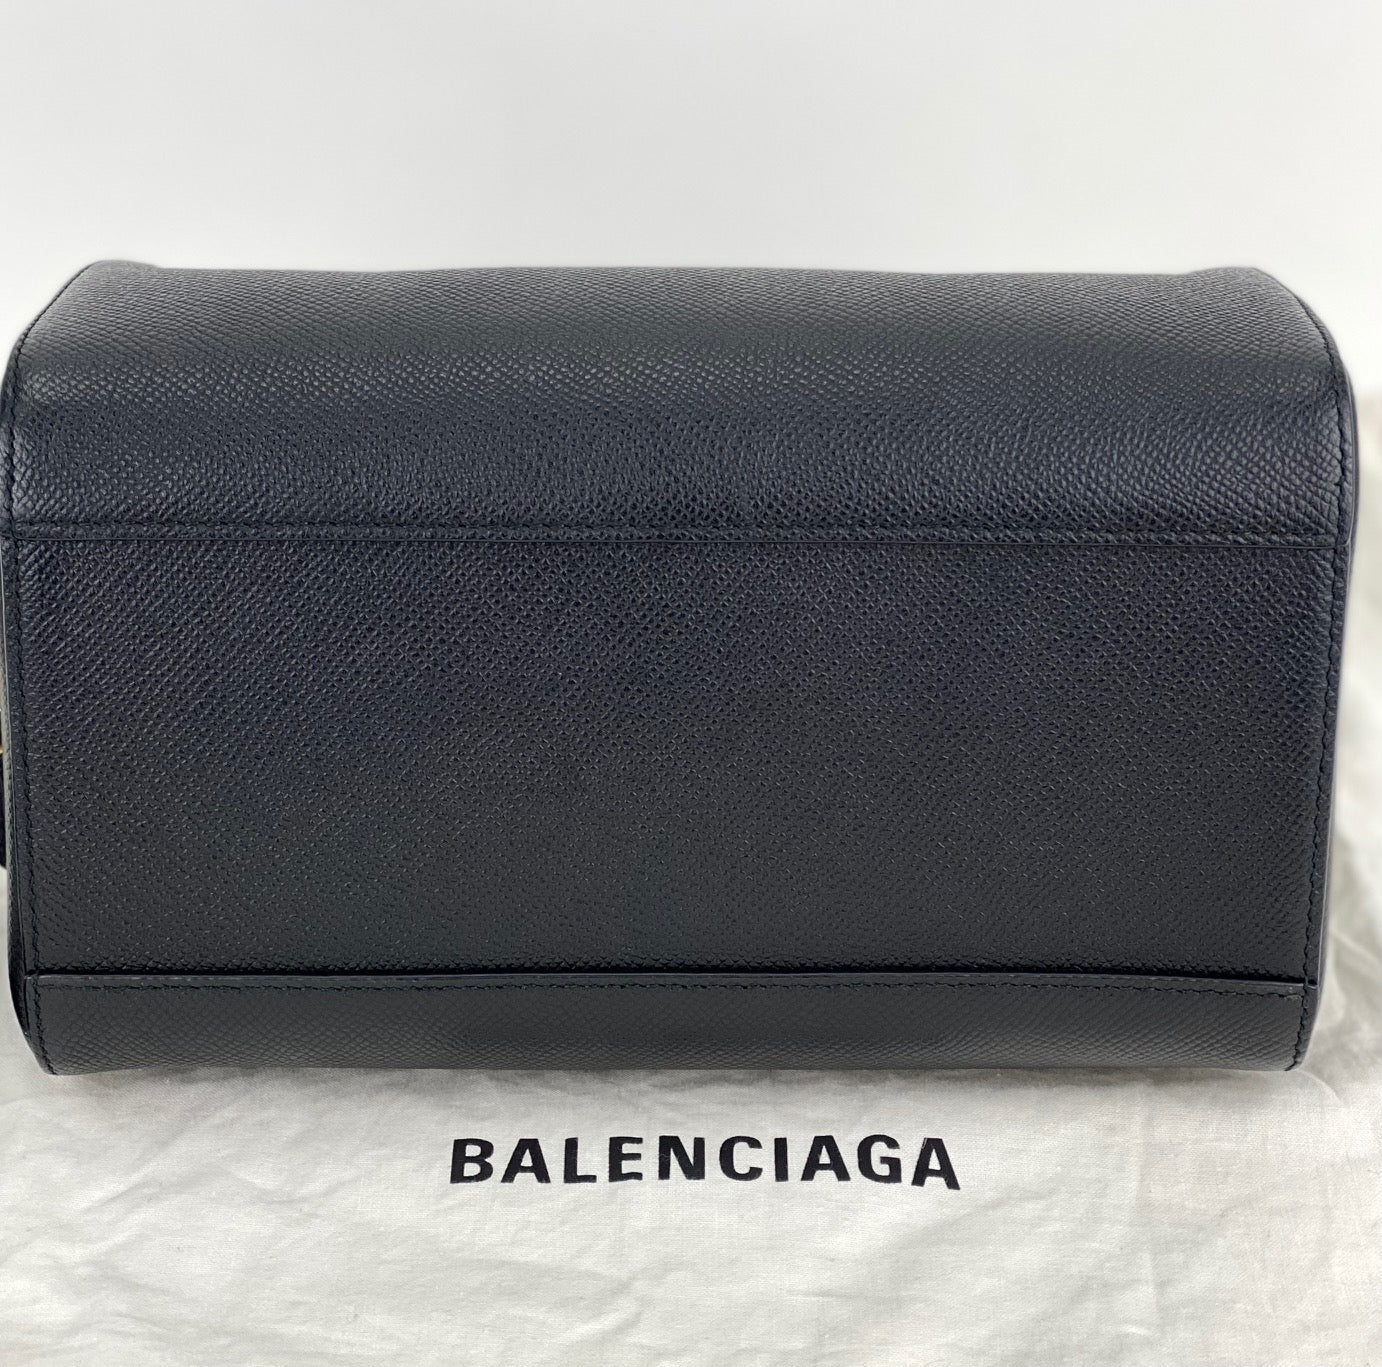 Balenciaga Ville Bowling Small Black Grained Leather Satchel Crossbody Bag preowned